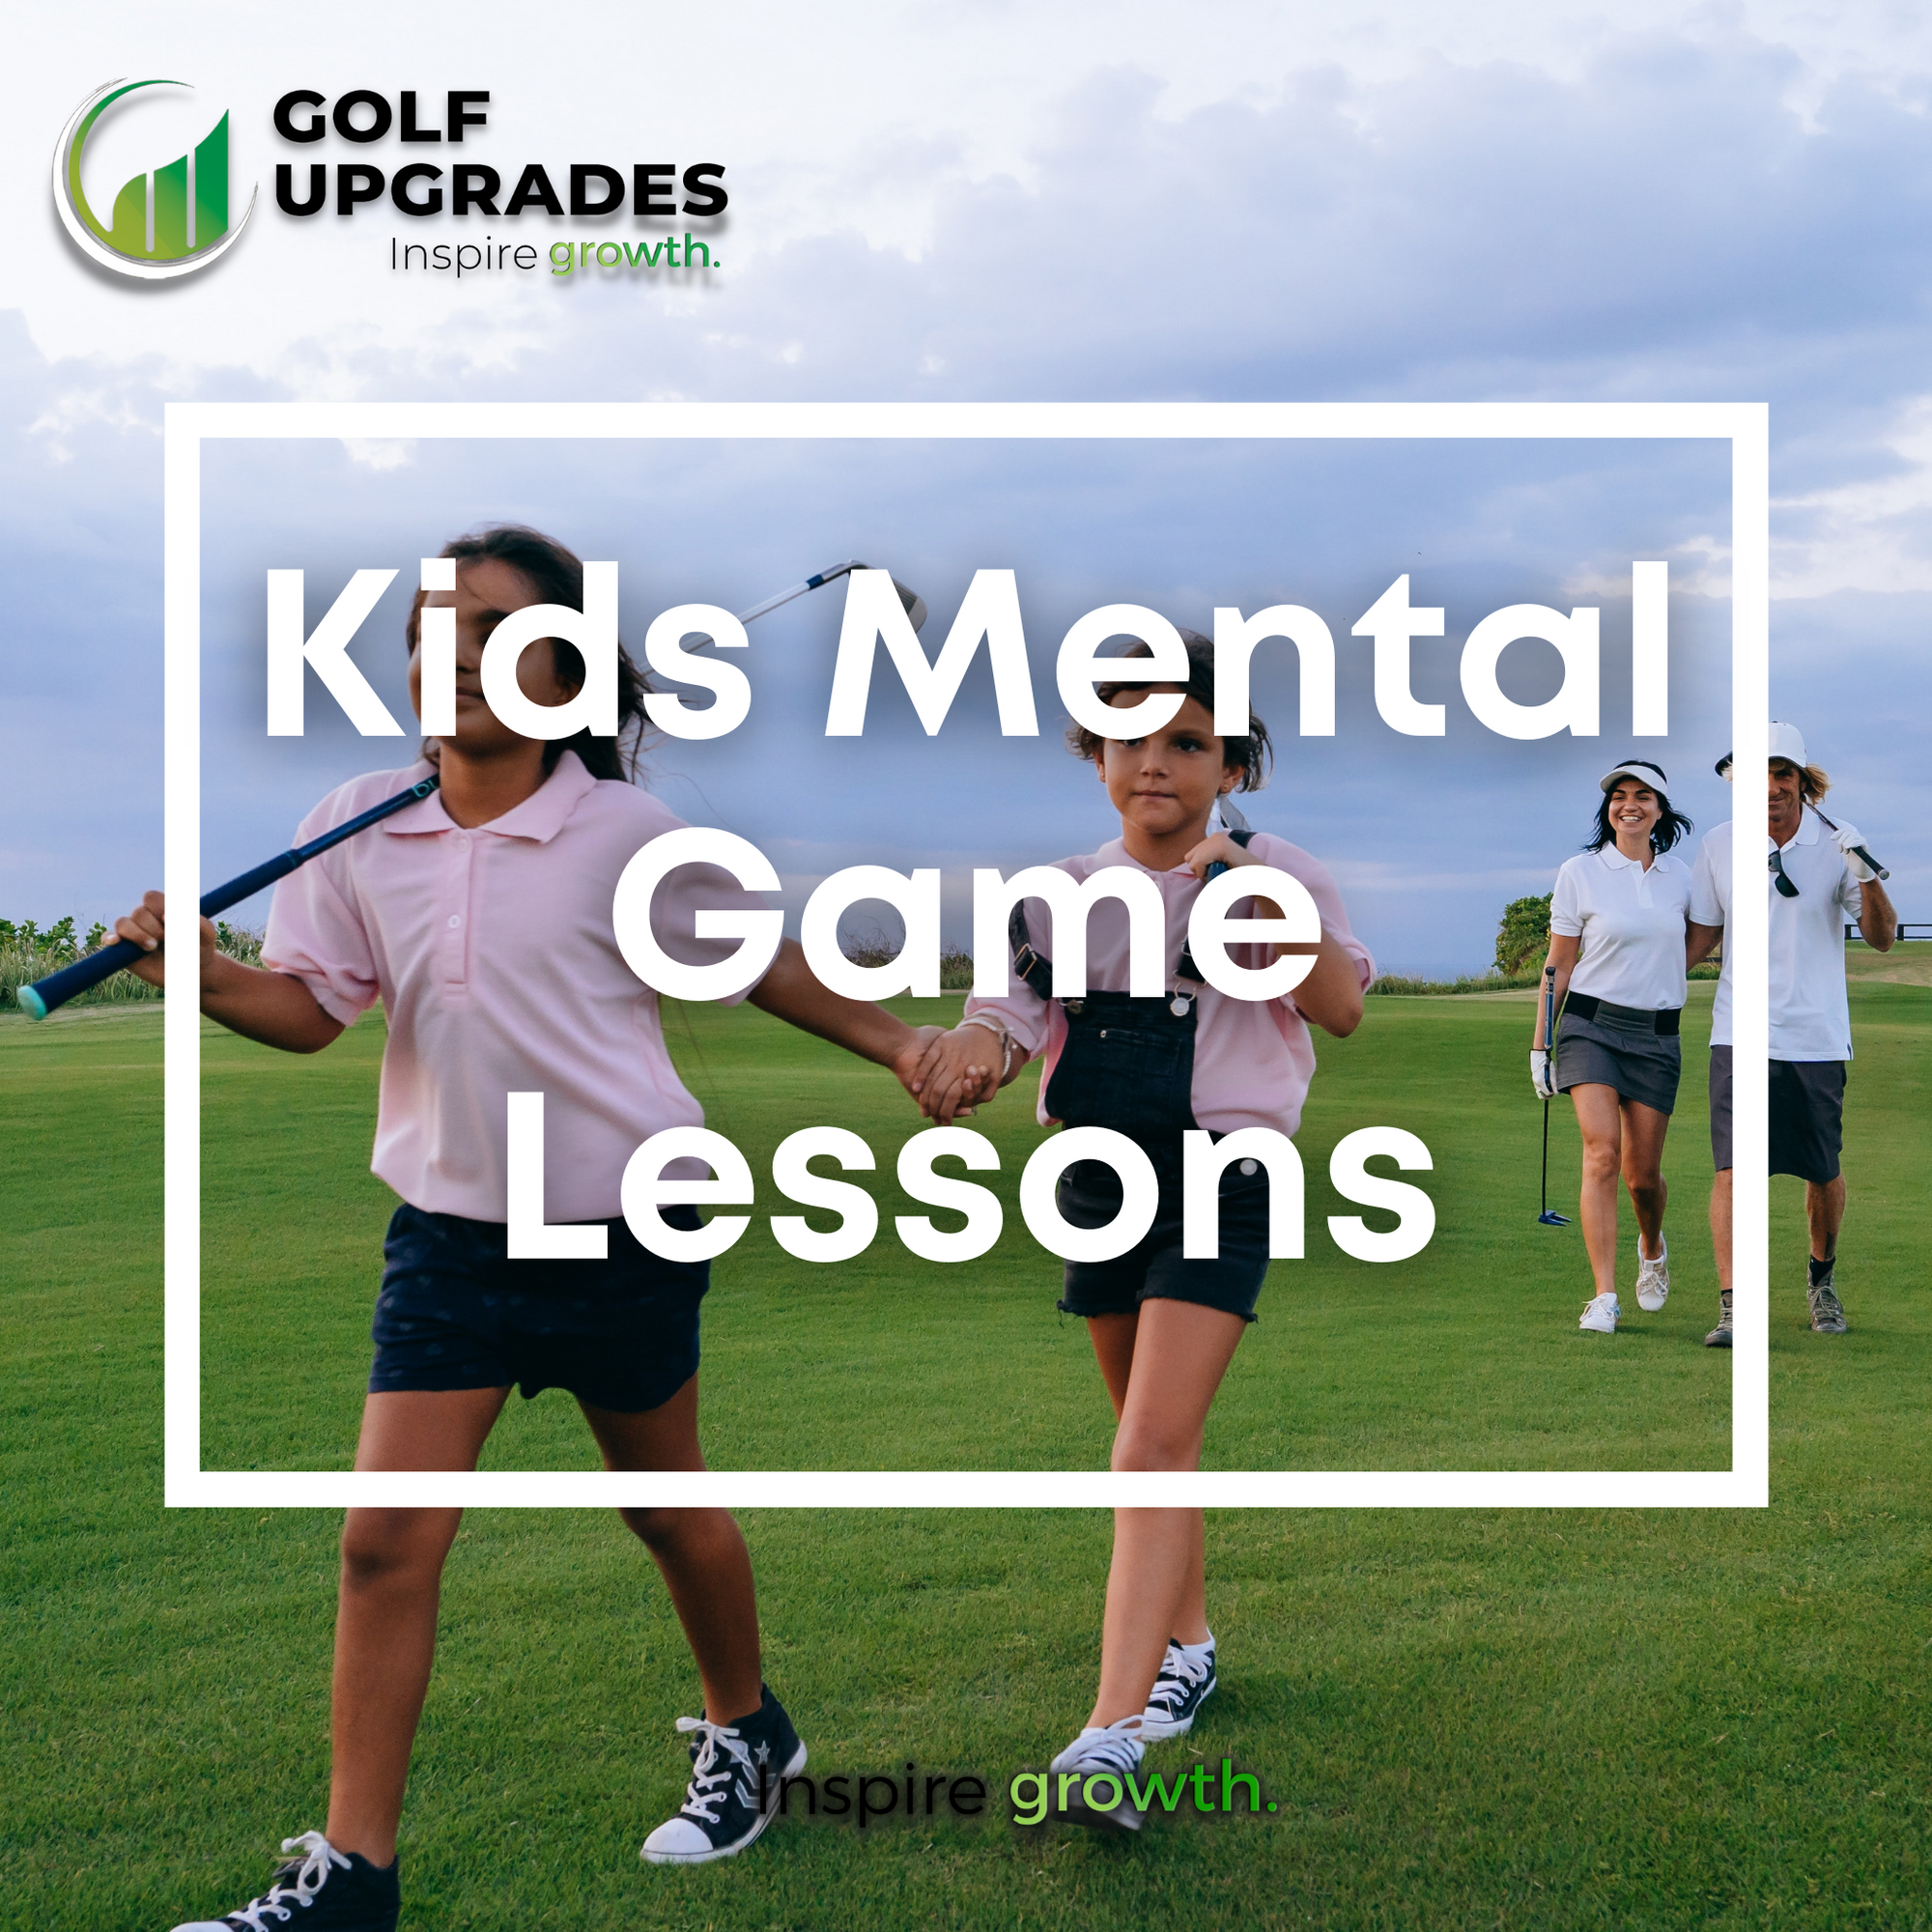 Kids’ Lessons for Their Mental Game | Golf Upgrades